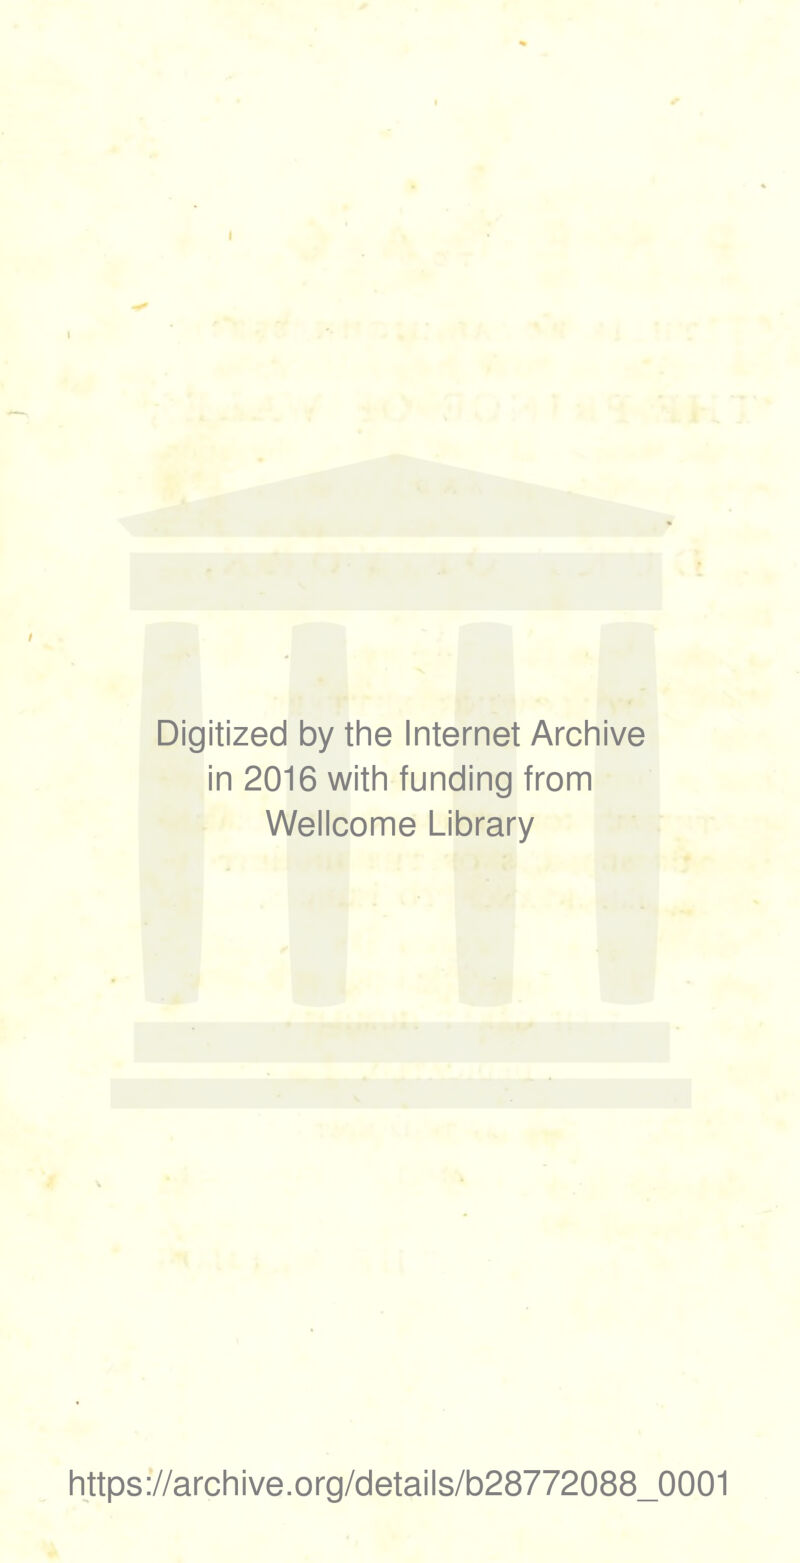 Digitized by the Internet Archive in 2016 with funding from Wellcome Library https://archive.org/details/b28772088_0001